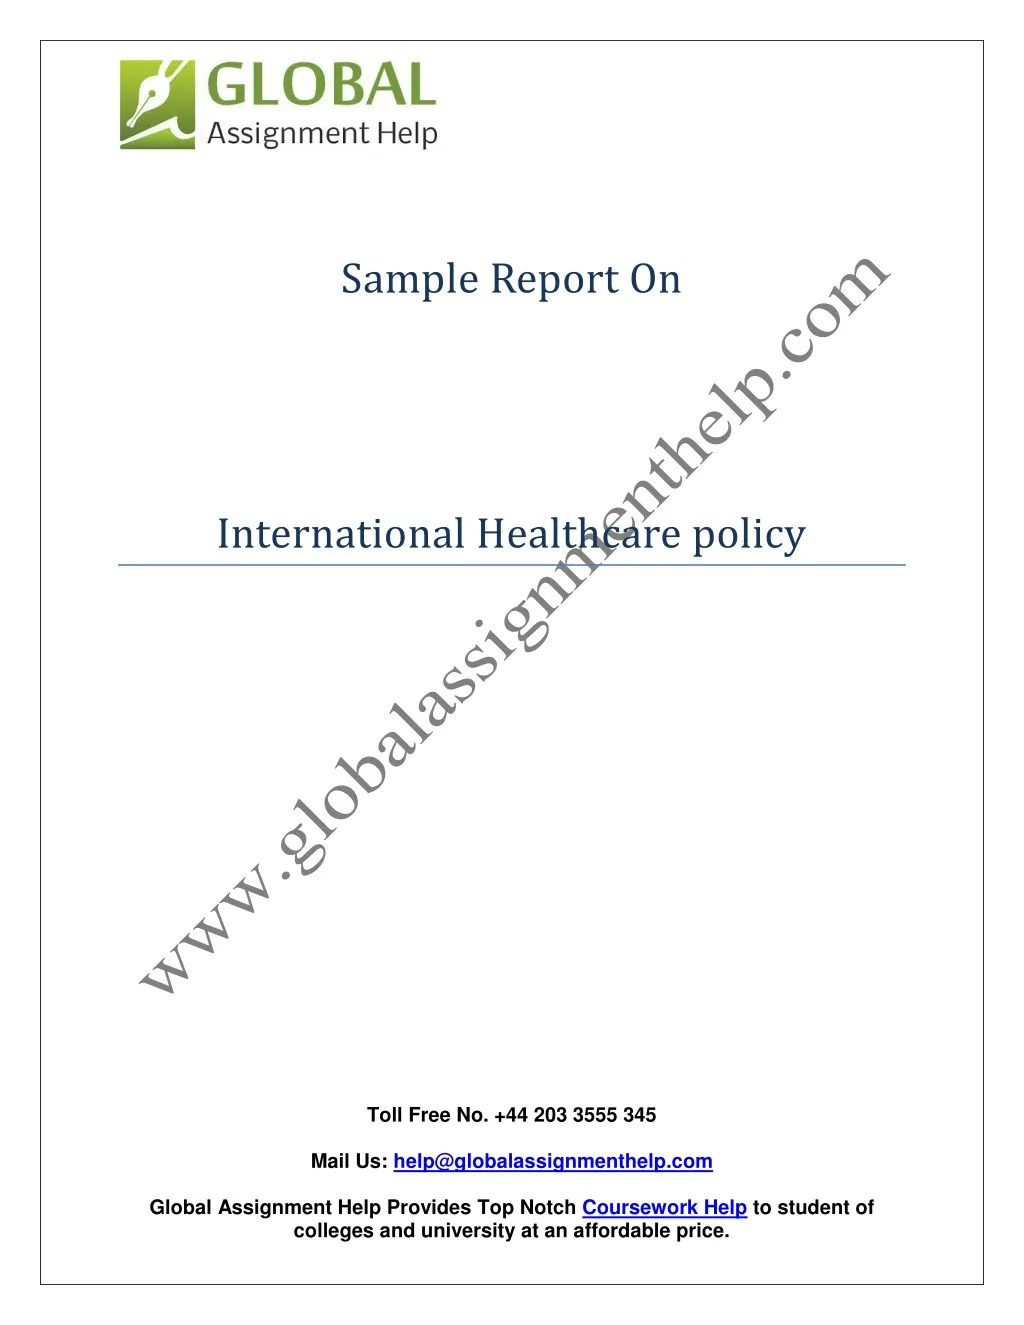 sample report on international healthcare policy